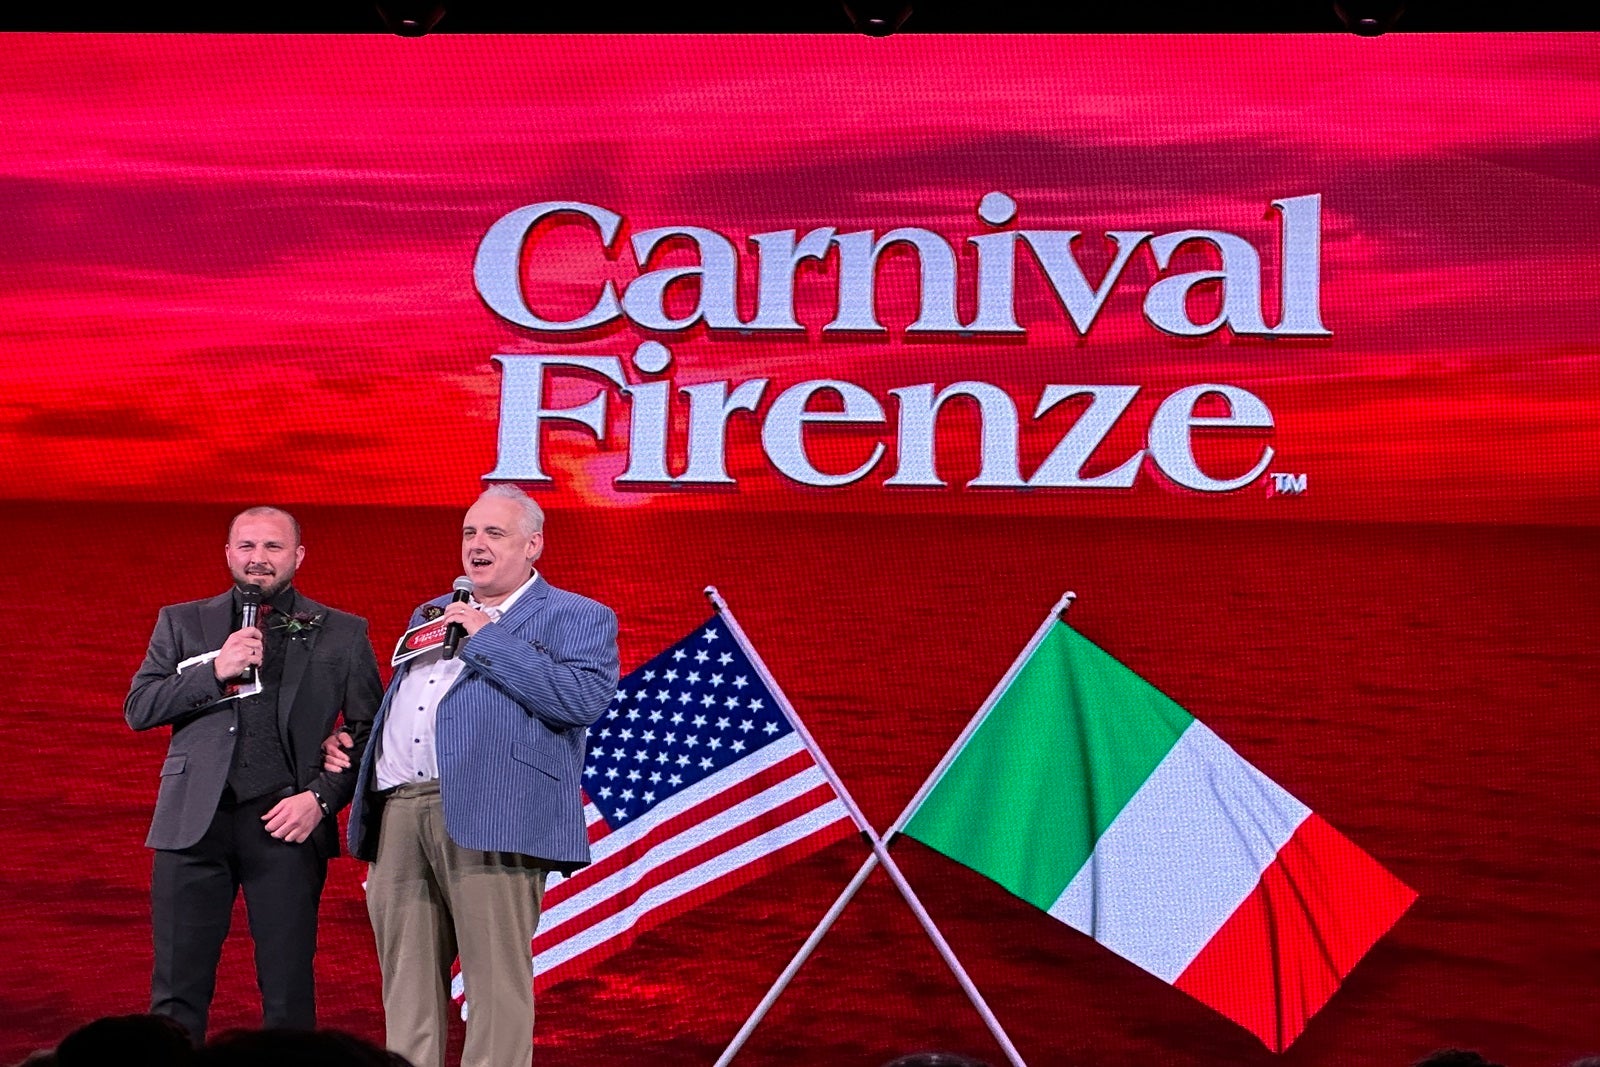 Two men on a stage in front of a giant screen that reads "Carnival Firenze" with American and Italian flags under the text